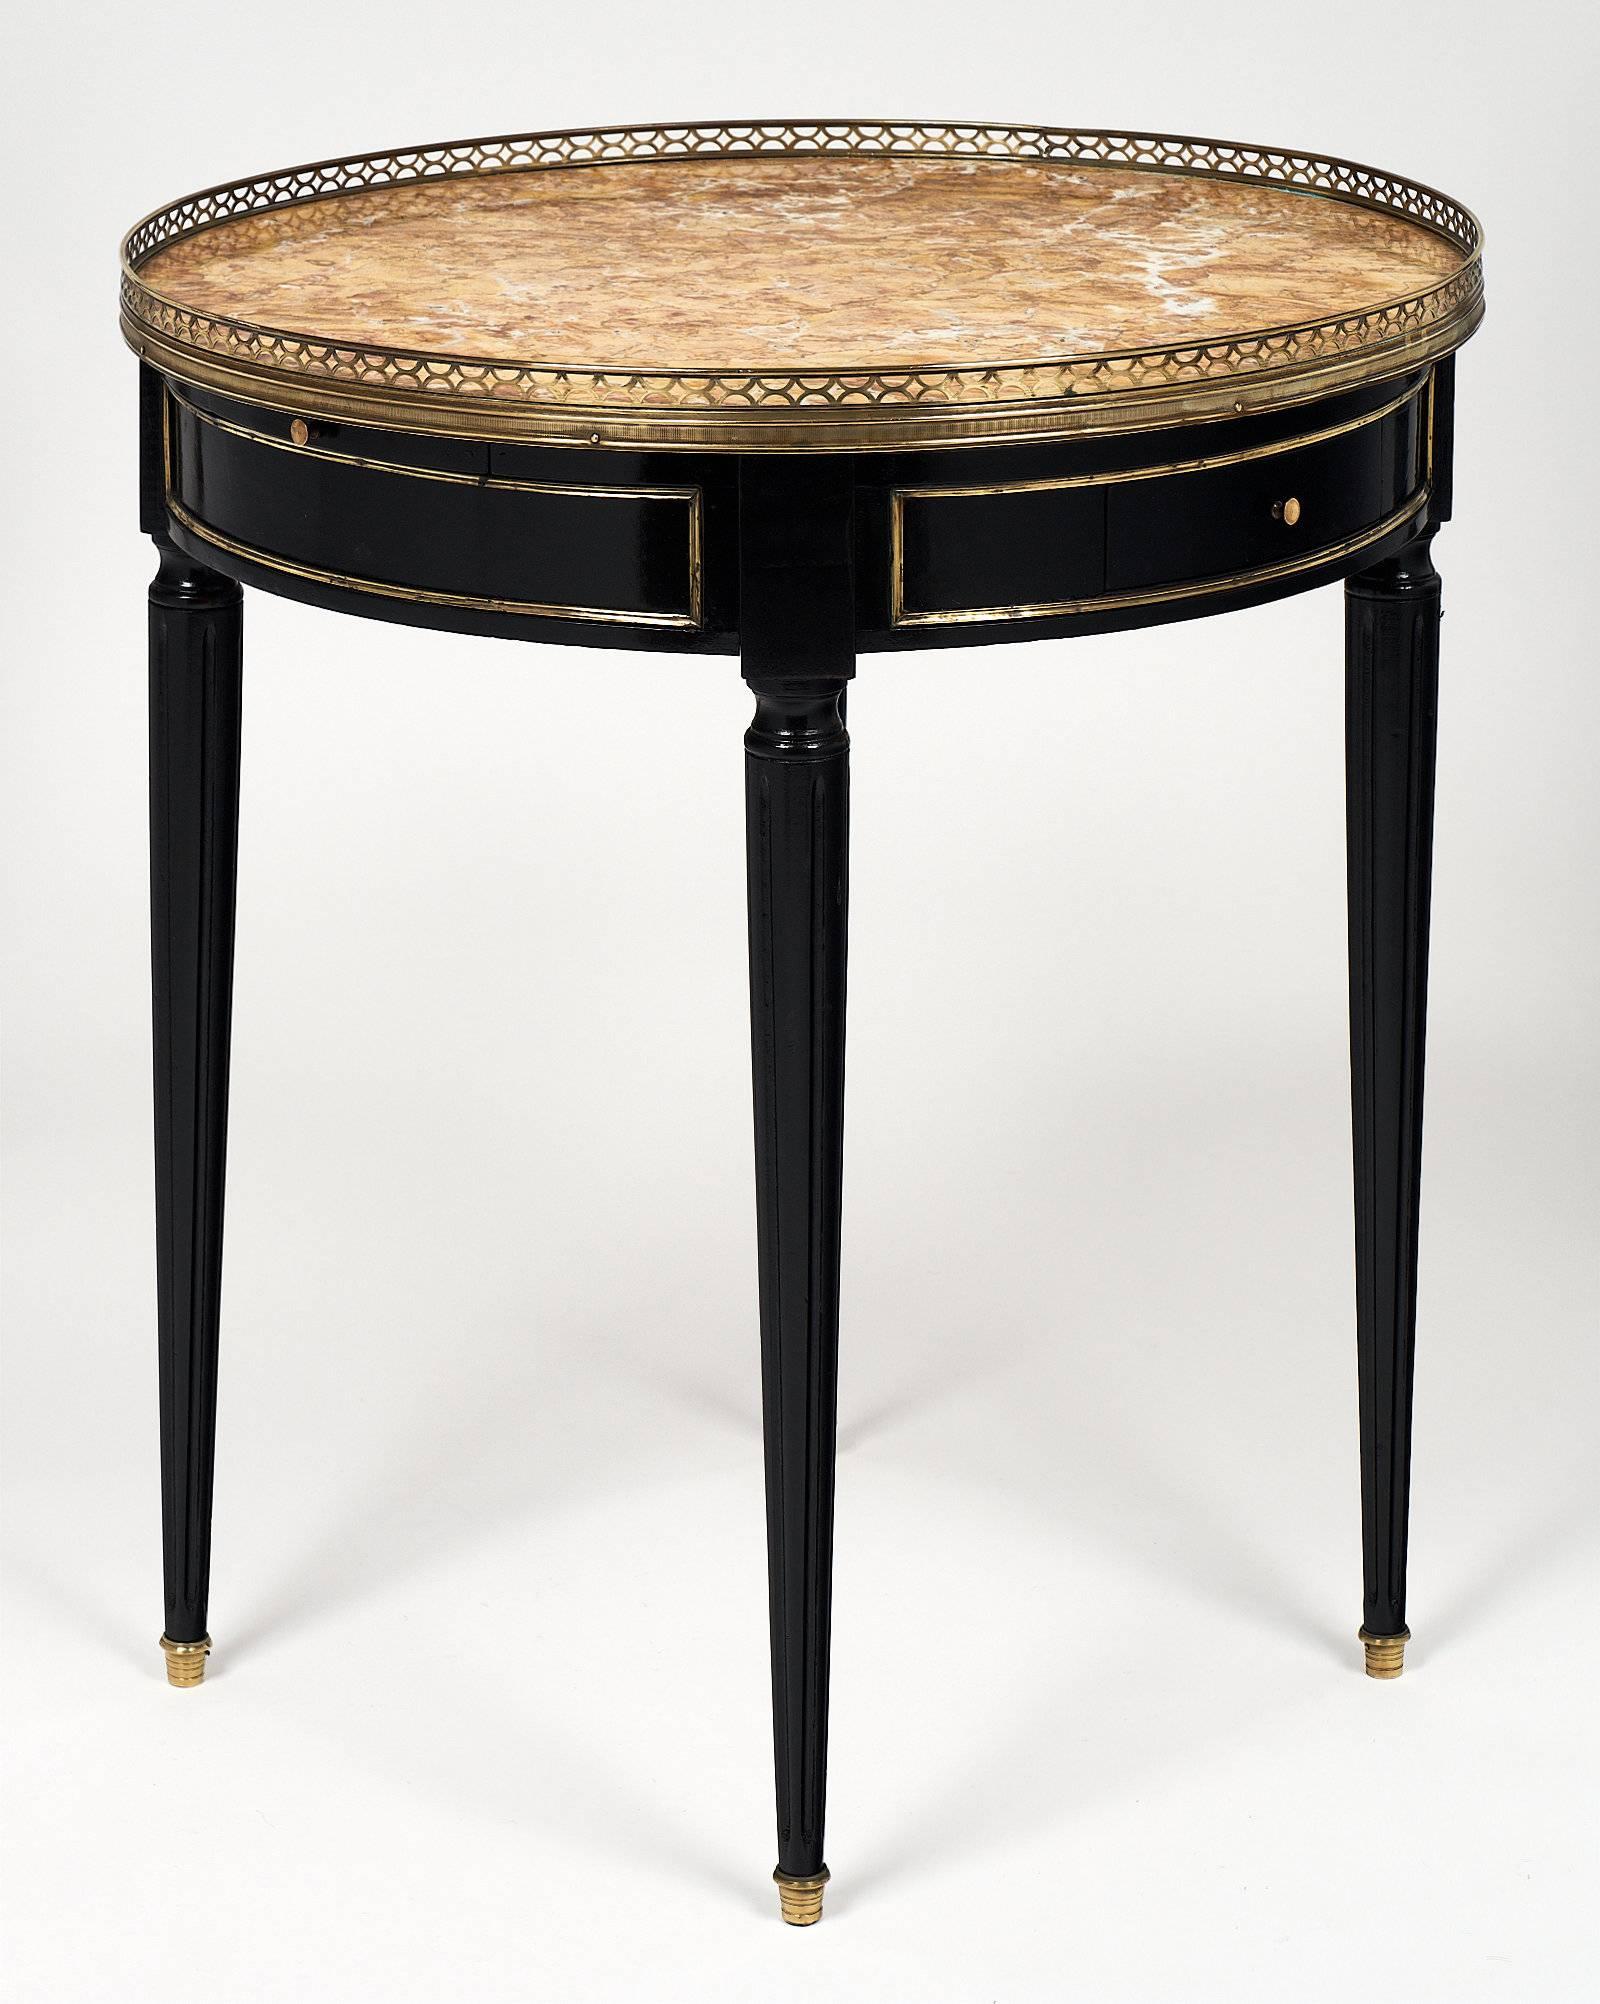 An elegant Louis XVI mahogany side table with a veined gold “brêche D’Alep” marble top. It also features an opened gilt brass gallery; fluted legs with gilt brass feet; and brass trims. With its two drawers and two pull-out shelves; this elegant